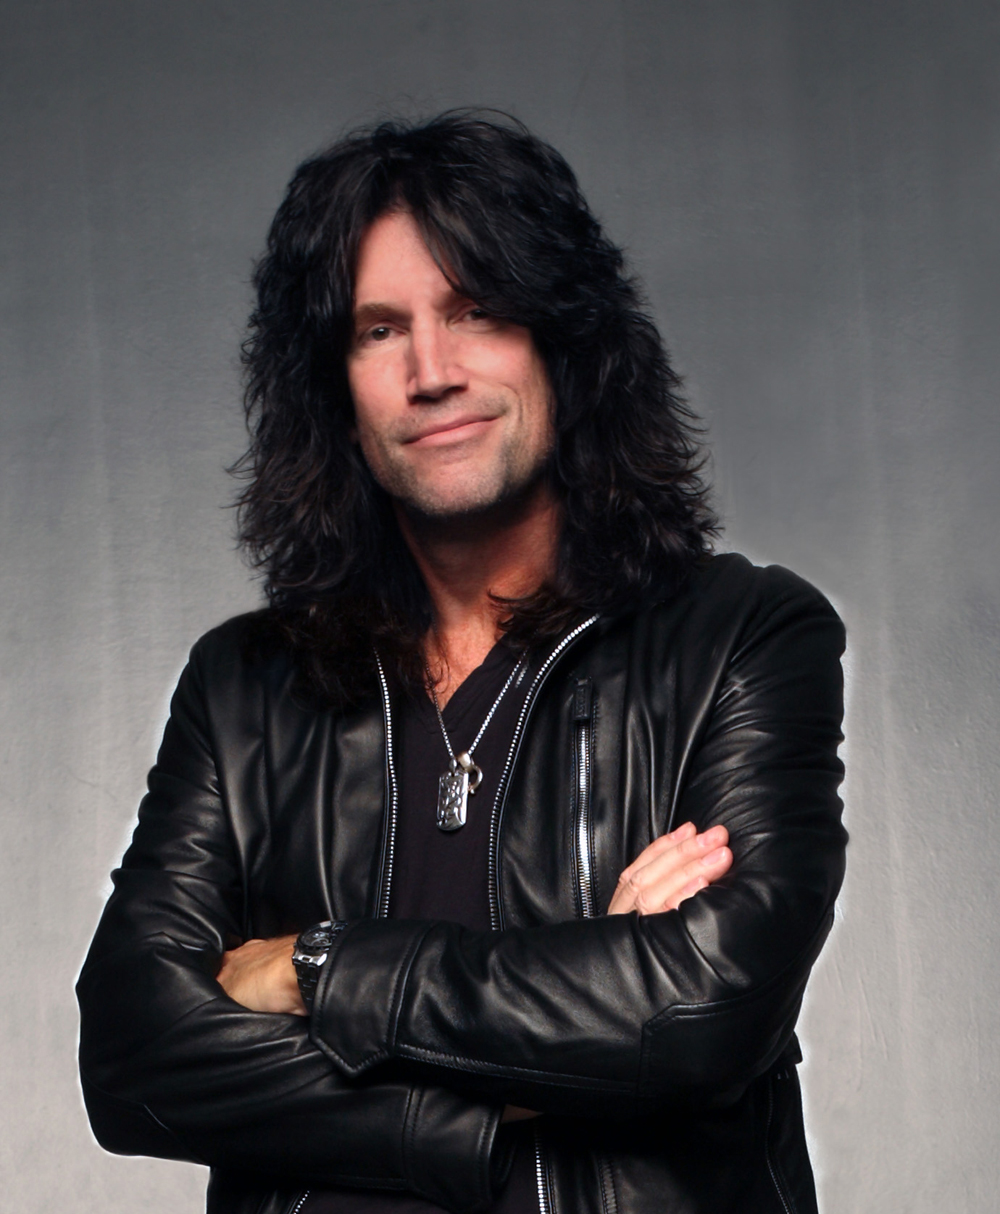 Kiss guitarist Tommy Thayer, AKA the Spaceman, shares his grail songs.